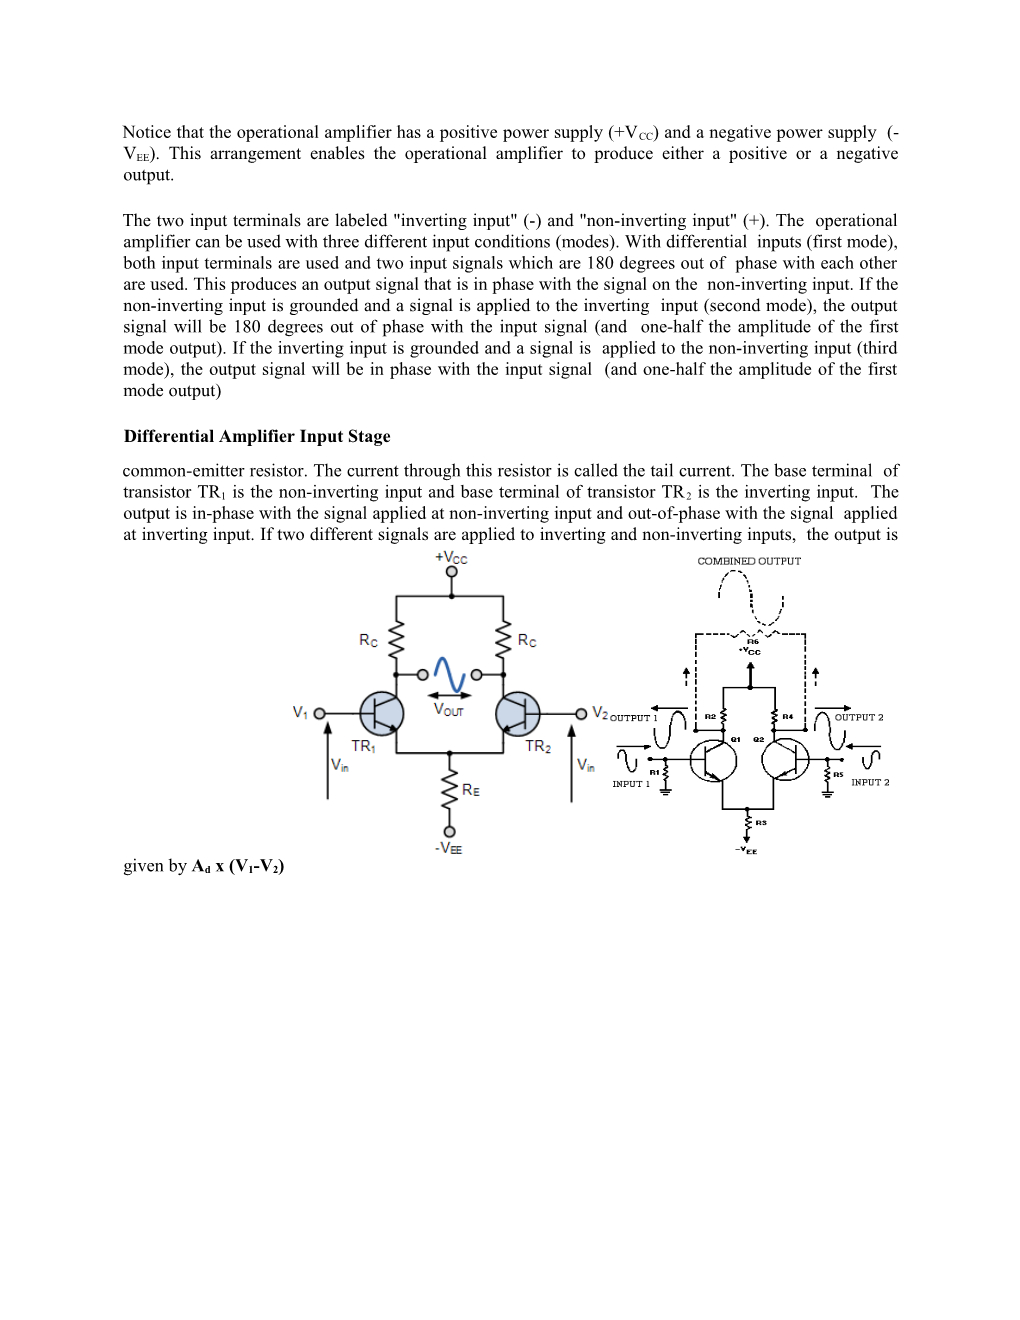 Differential Amplifier Input Stage